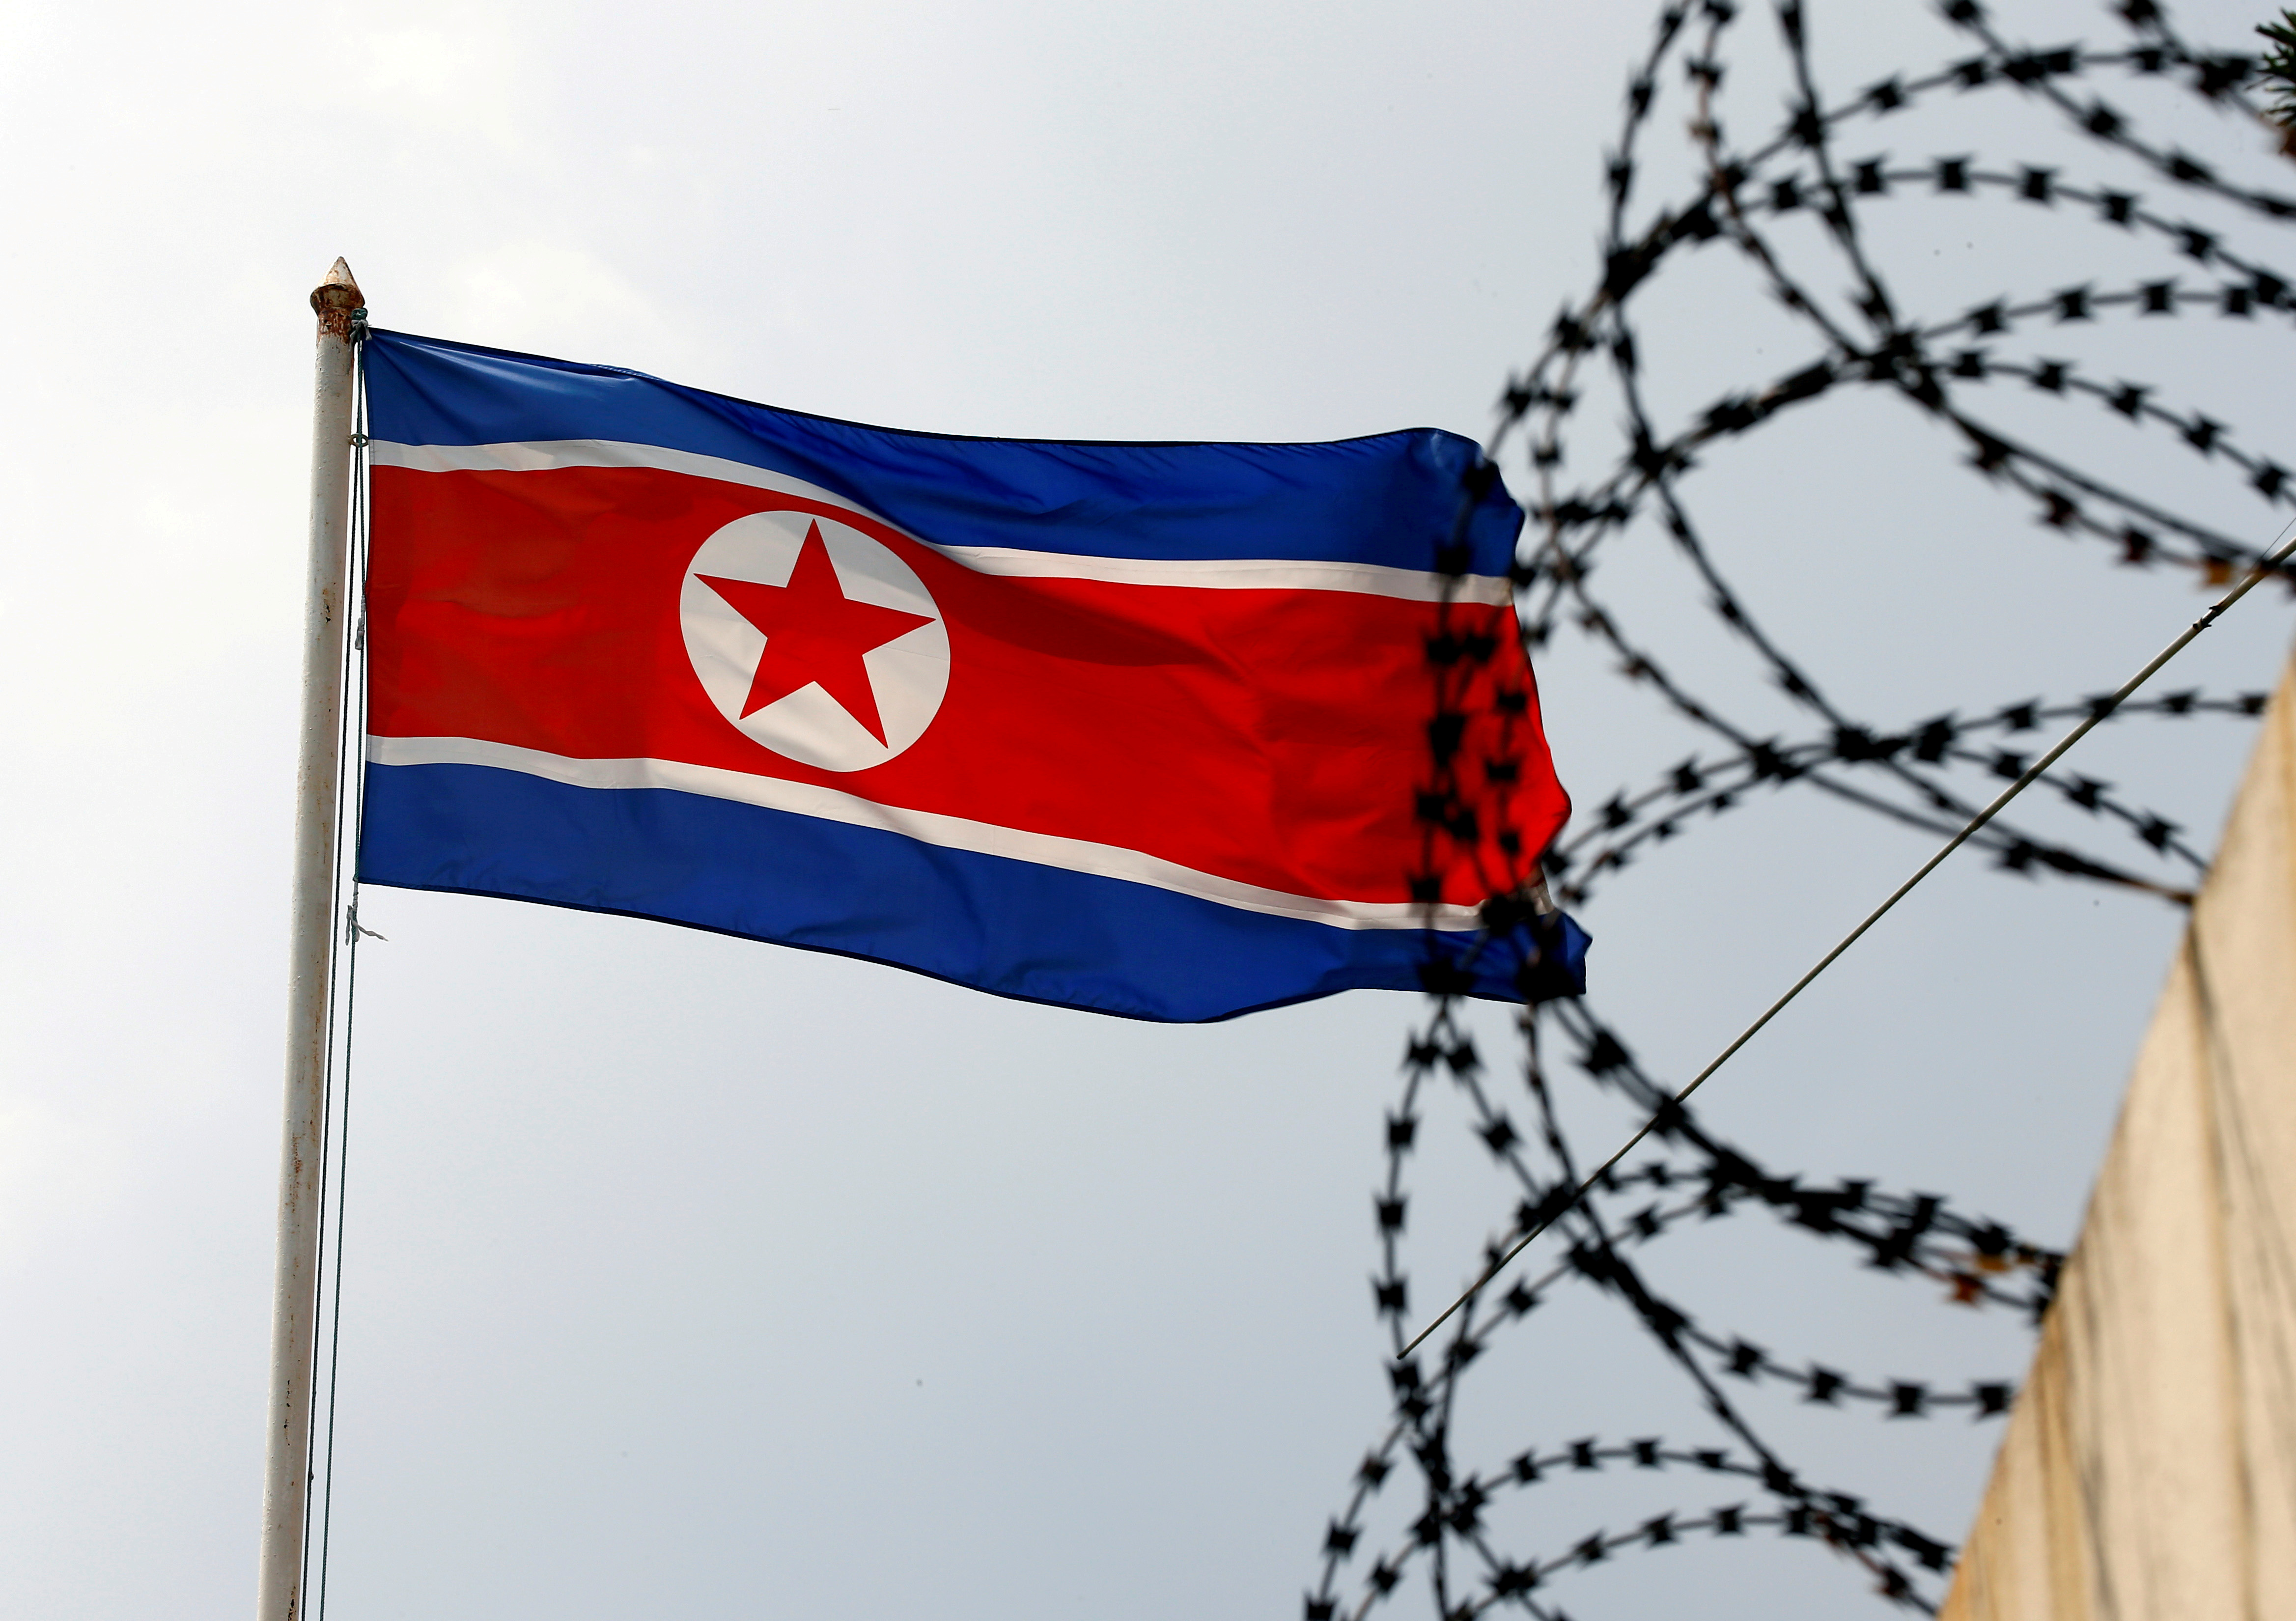 A North Korea flag flutters next to concertina wire at the North Korean embassy in Kuala Lumpur, Malaysia March 9, 2017. REUTERS/Edgar Su/File Photo